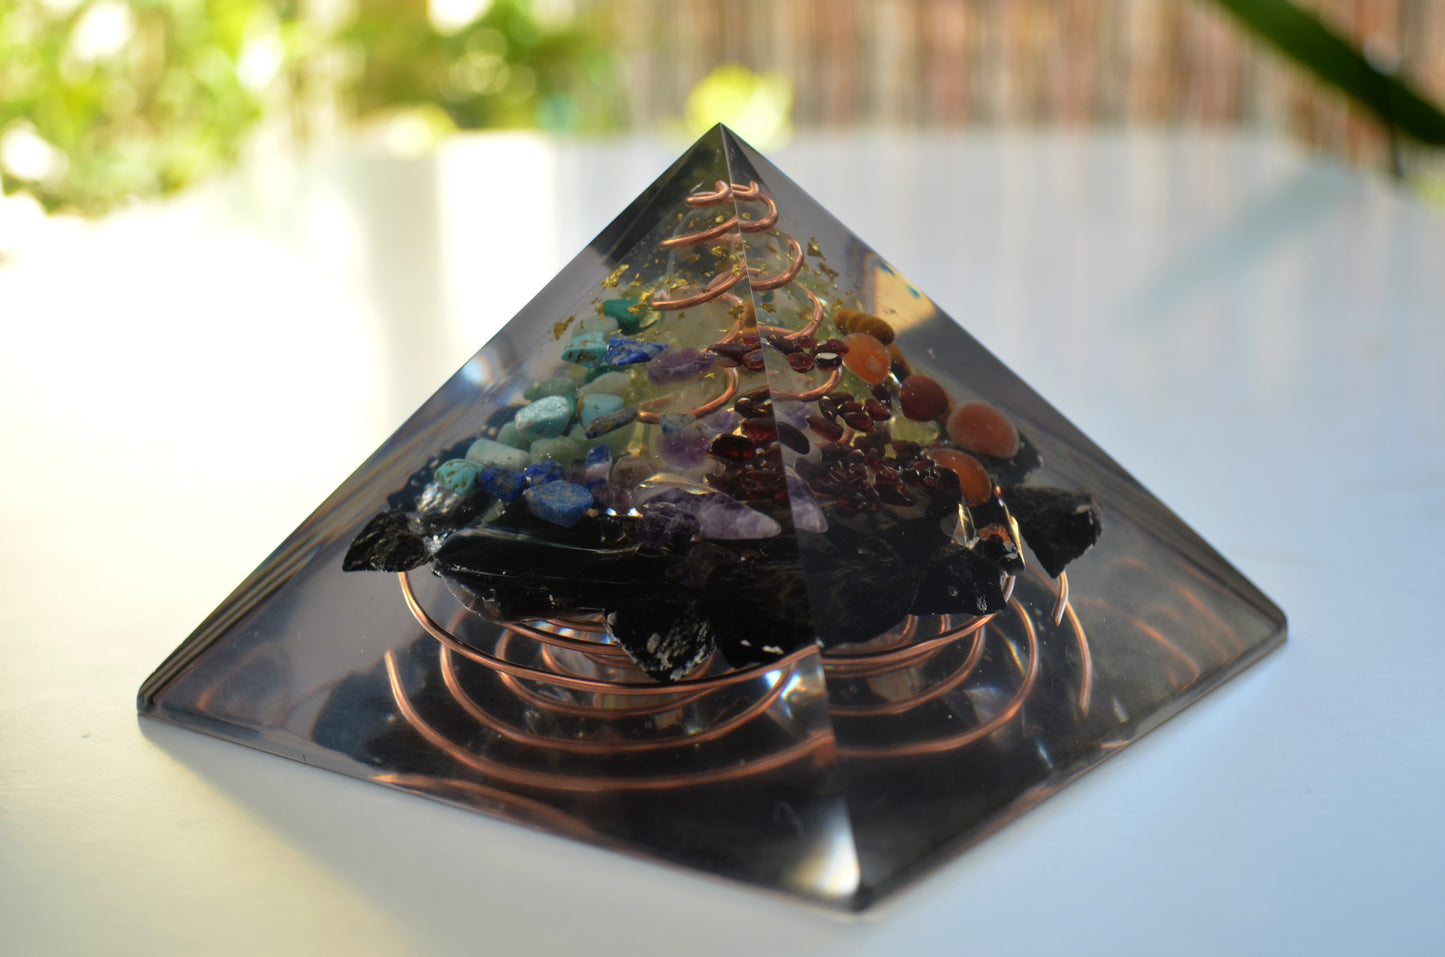 Orgonite orgone Pyramid, Money wealth and luck attraction Magnet - 7 chakra, Reiki, rainbow pyramid, money amulet, enchanted